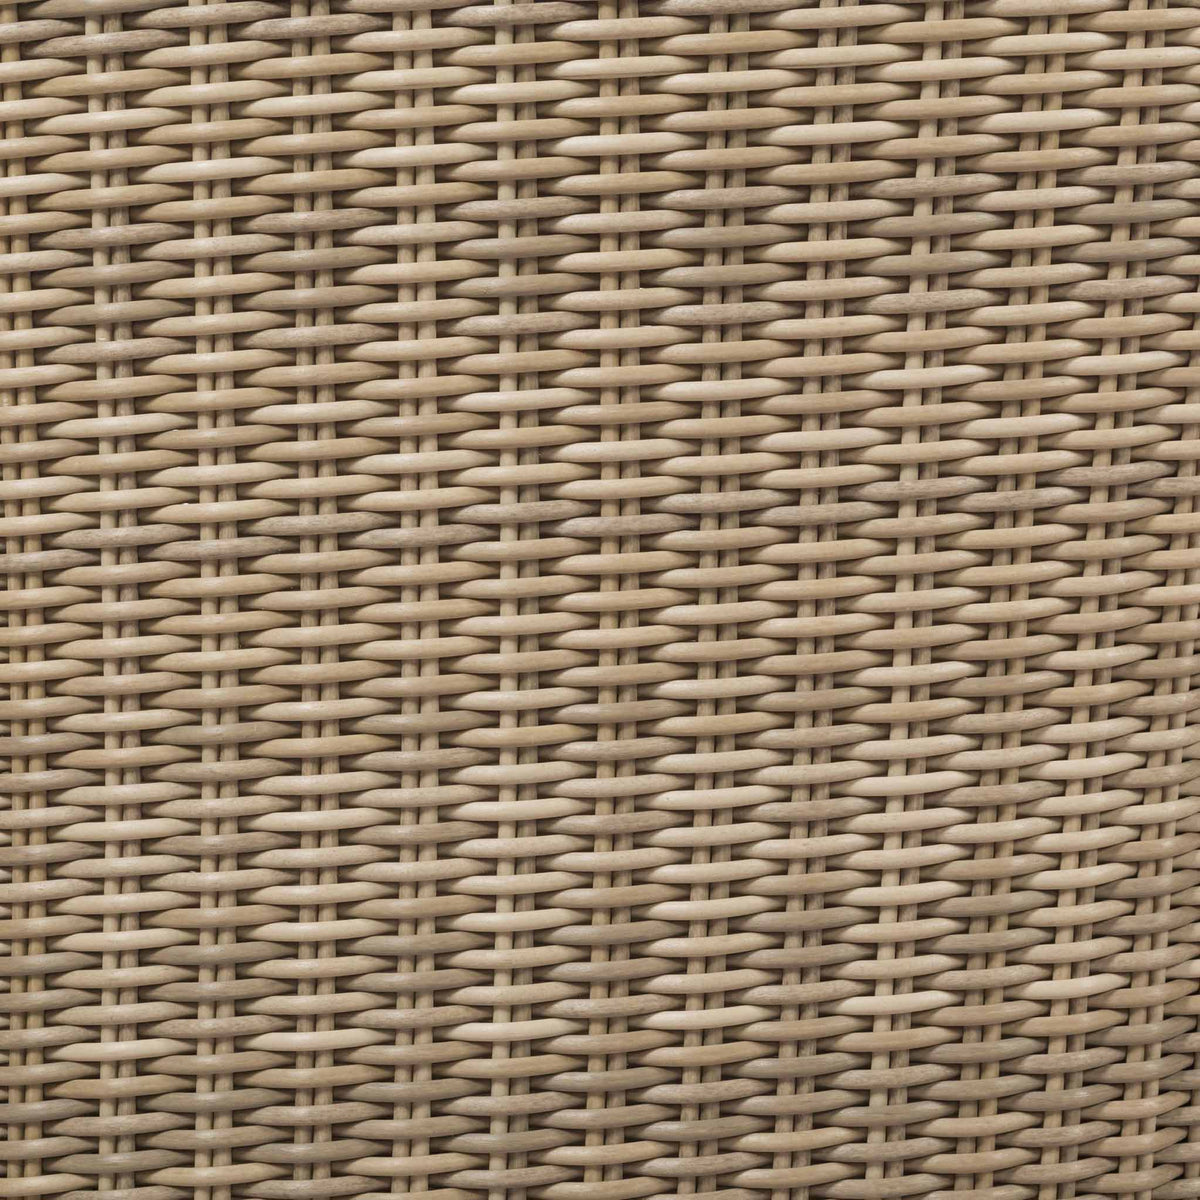 Wentworth Grand Rattan Lounge Set with Coffee Table close up of rattan weave